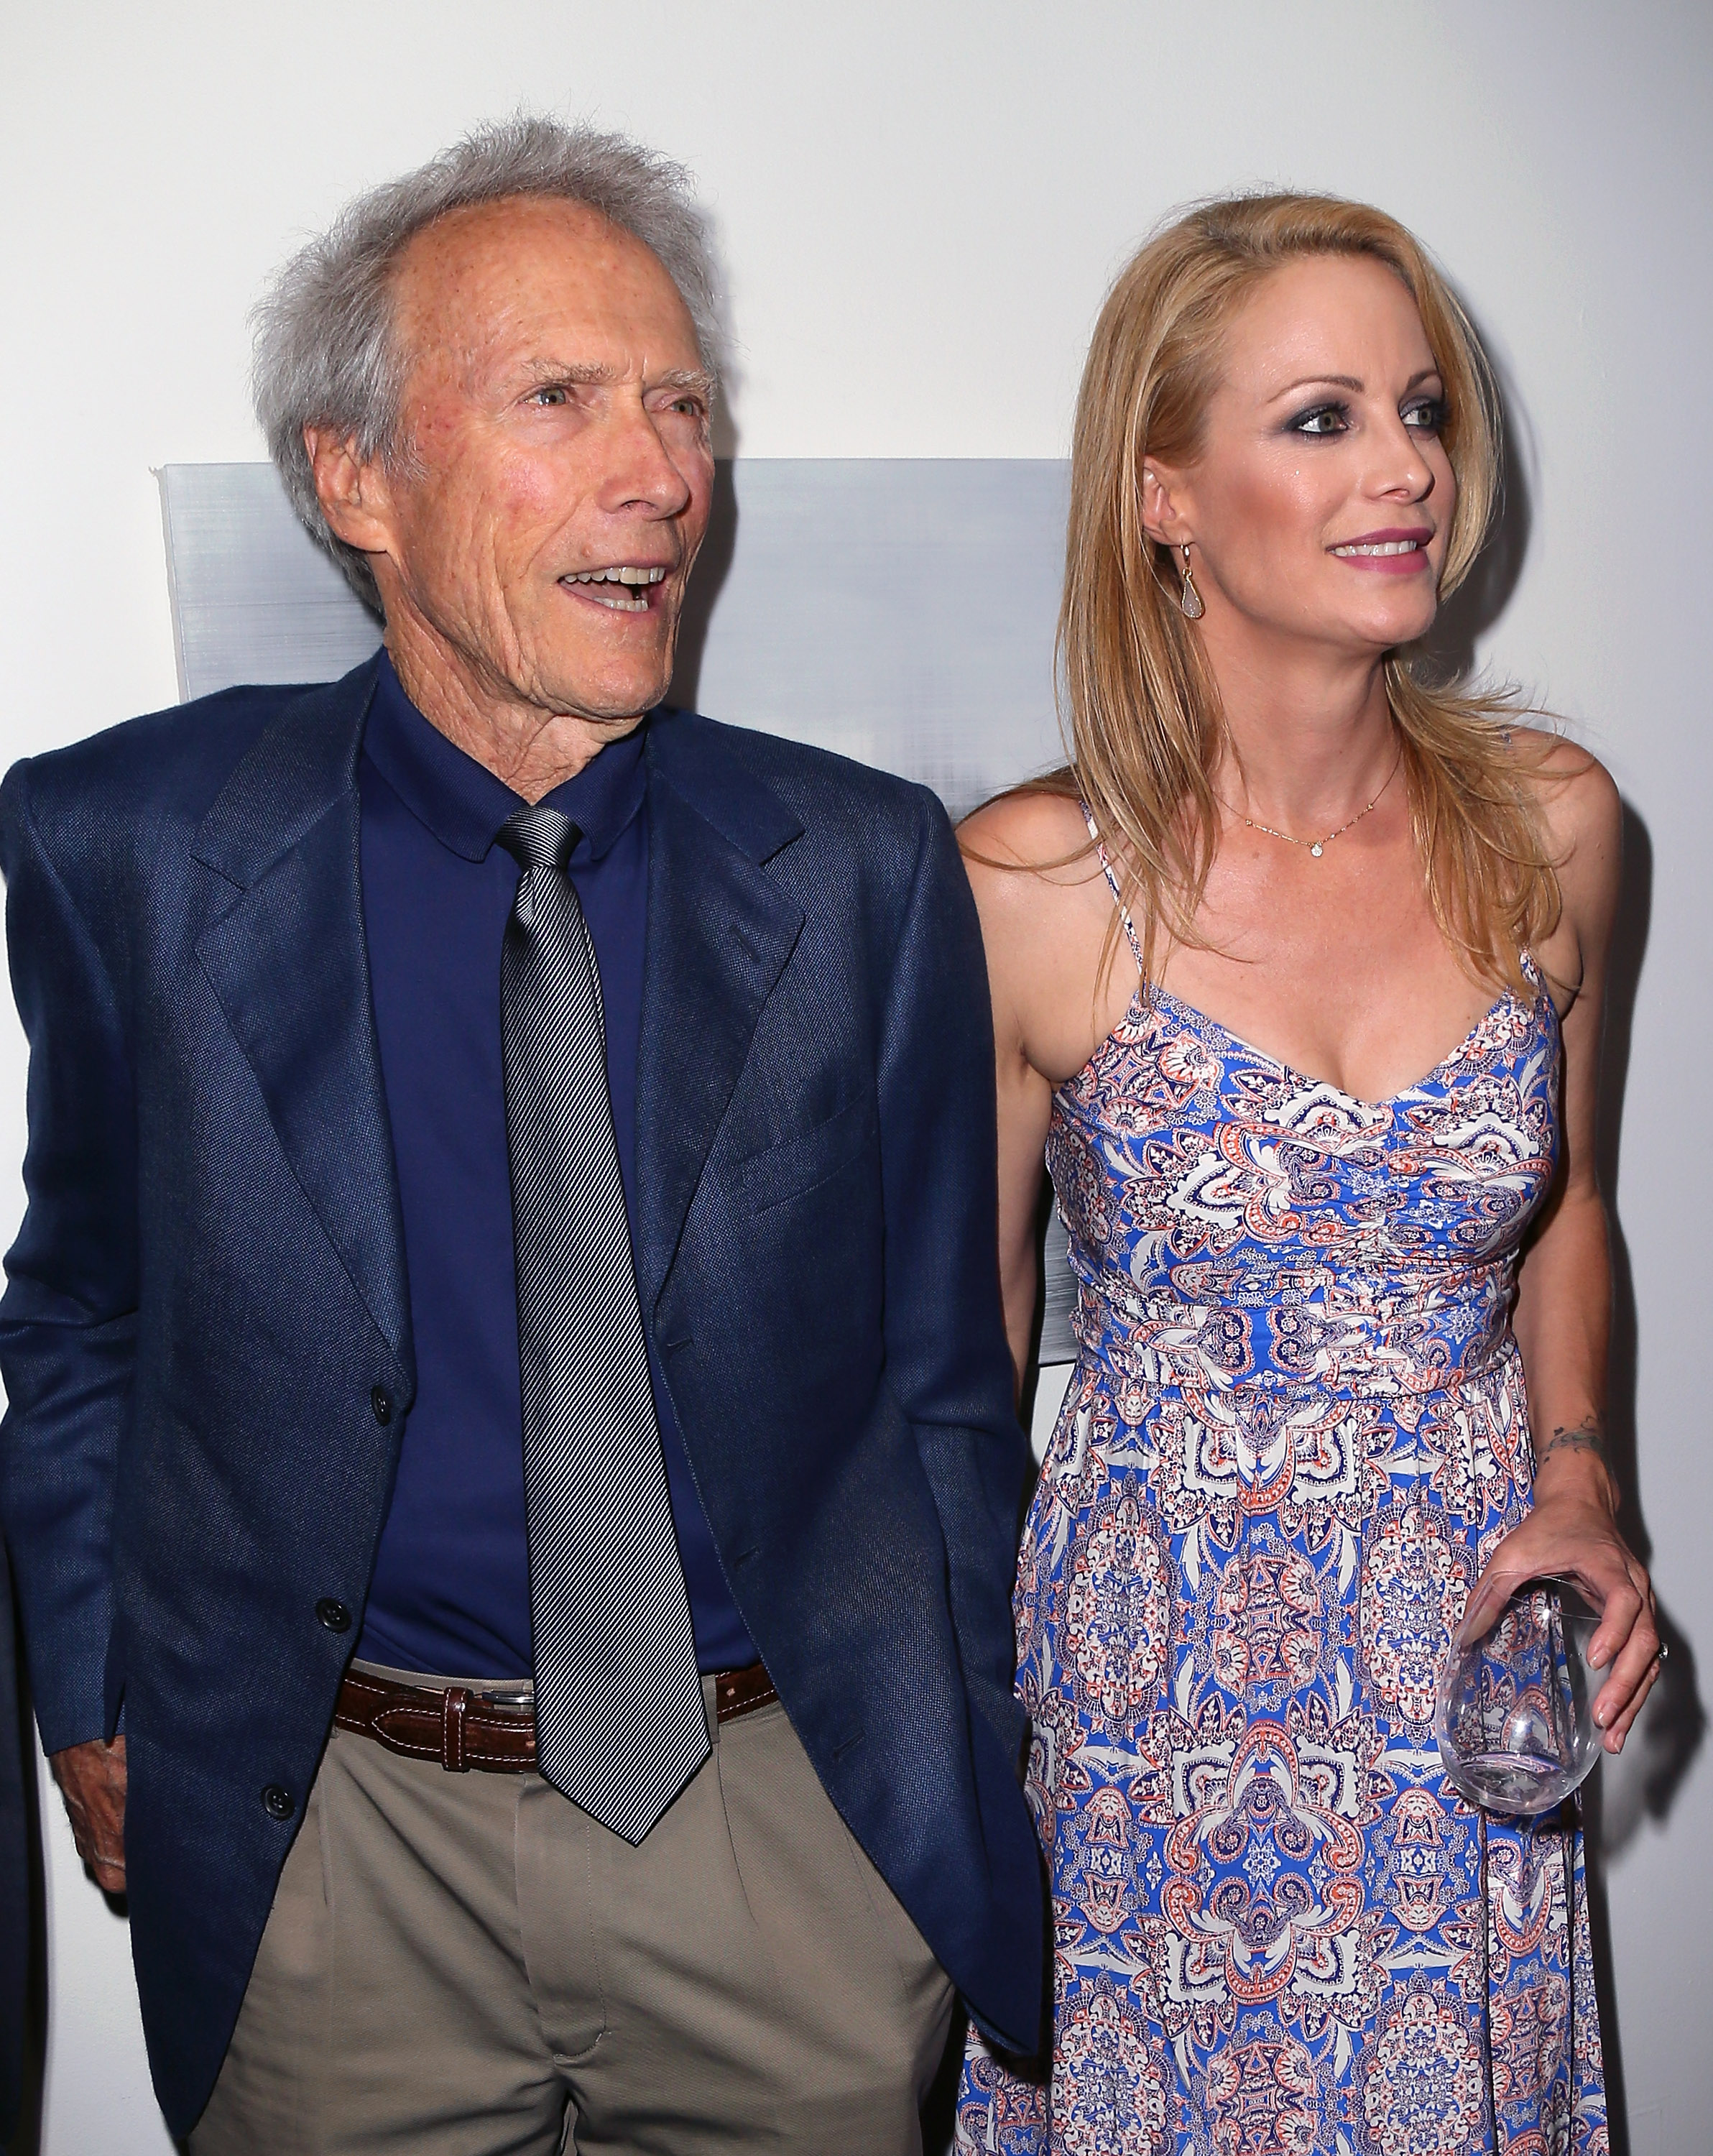 Clint and Alison Eastwood at the Art for Animals fundraiser art event in 2015 | Source: Getty Images